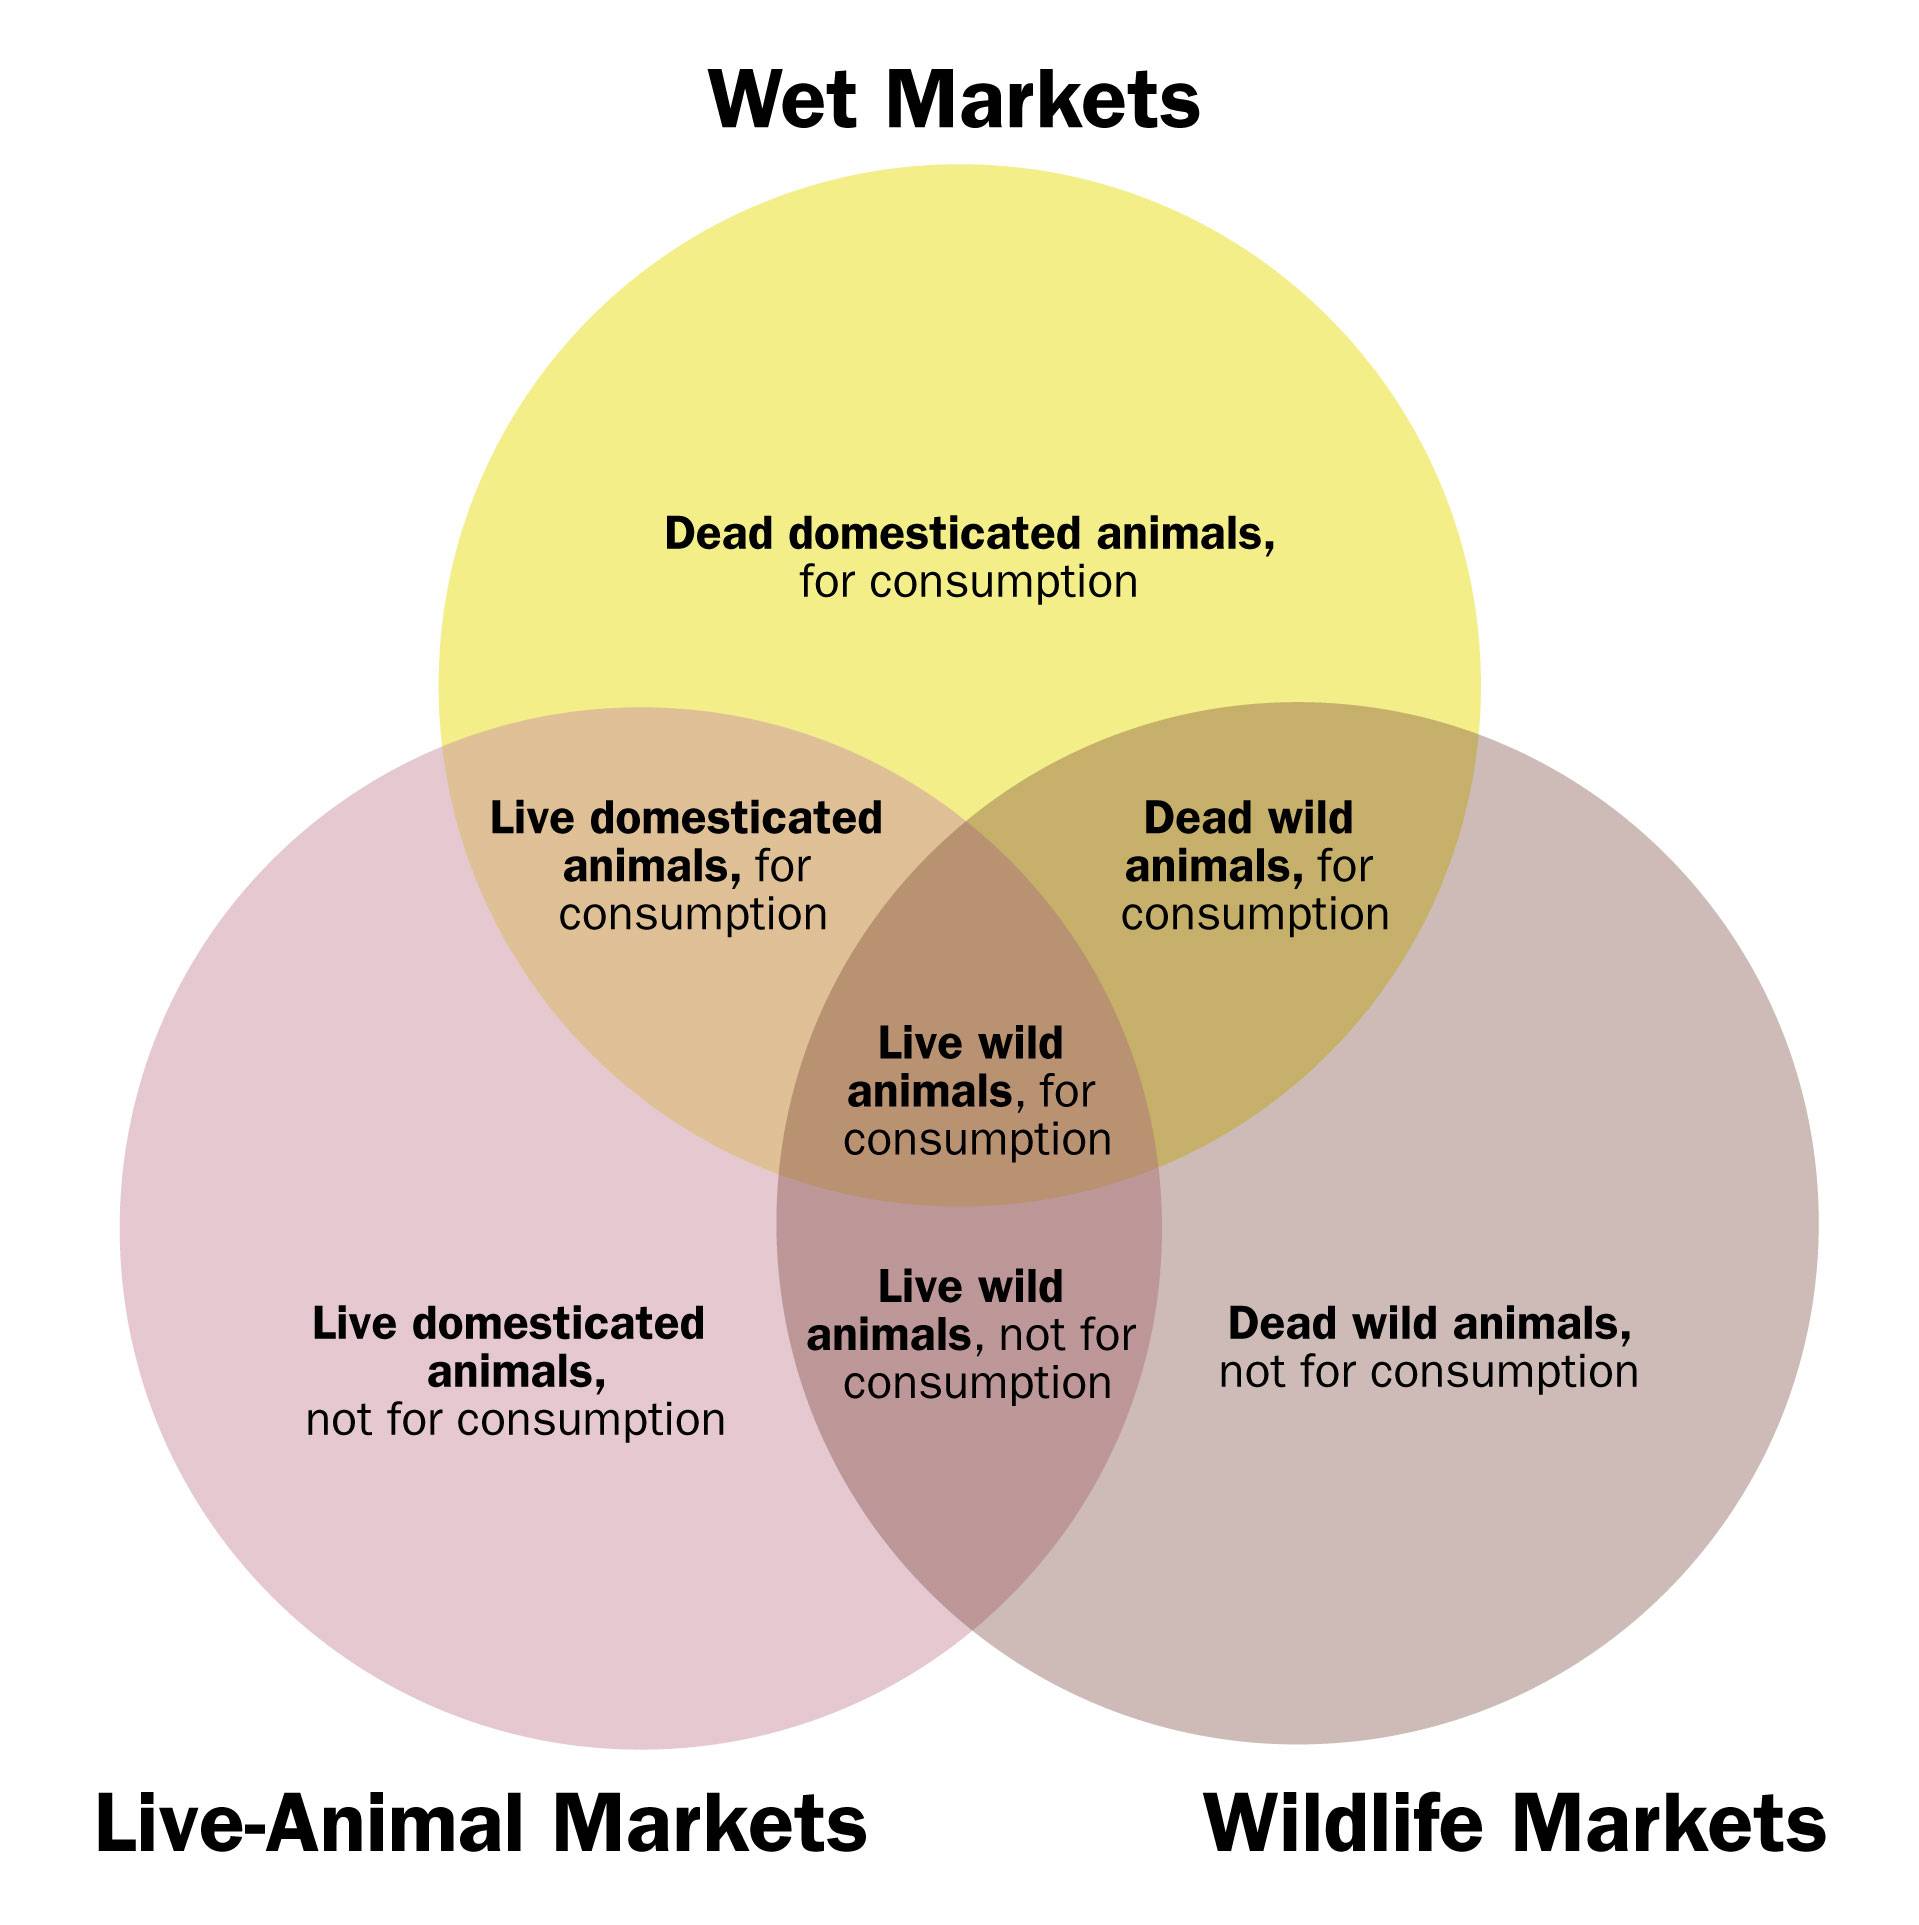 enn diagram illustrating the intersection between wet markets: dead domesticated animals for consumption; live animal markets (live domesticated animals, not for consumption; and wildlife markets, dead wild animals, not for consumption.